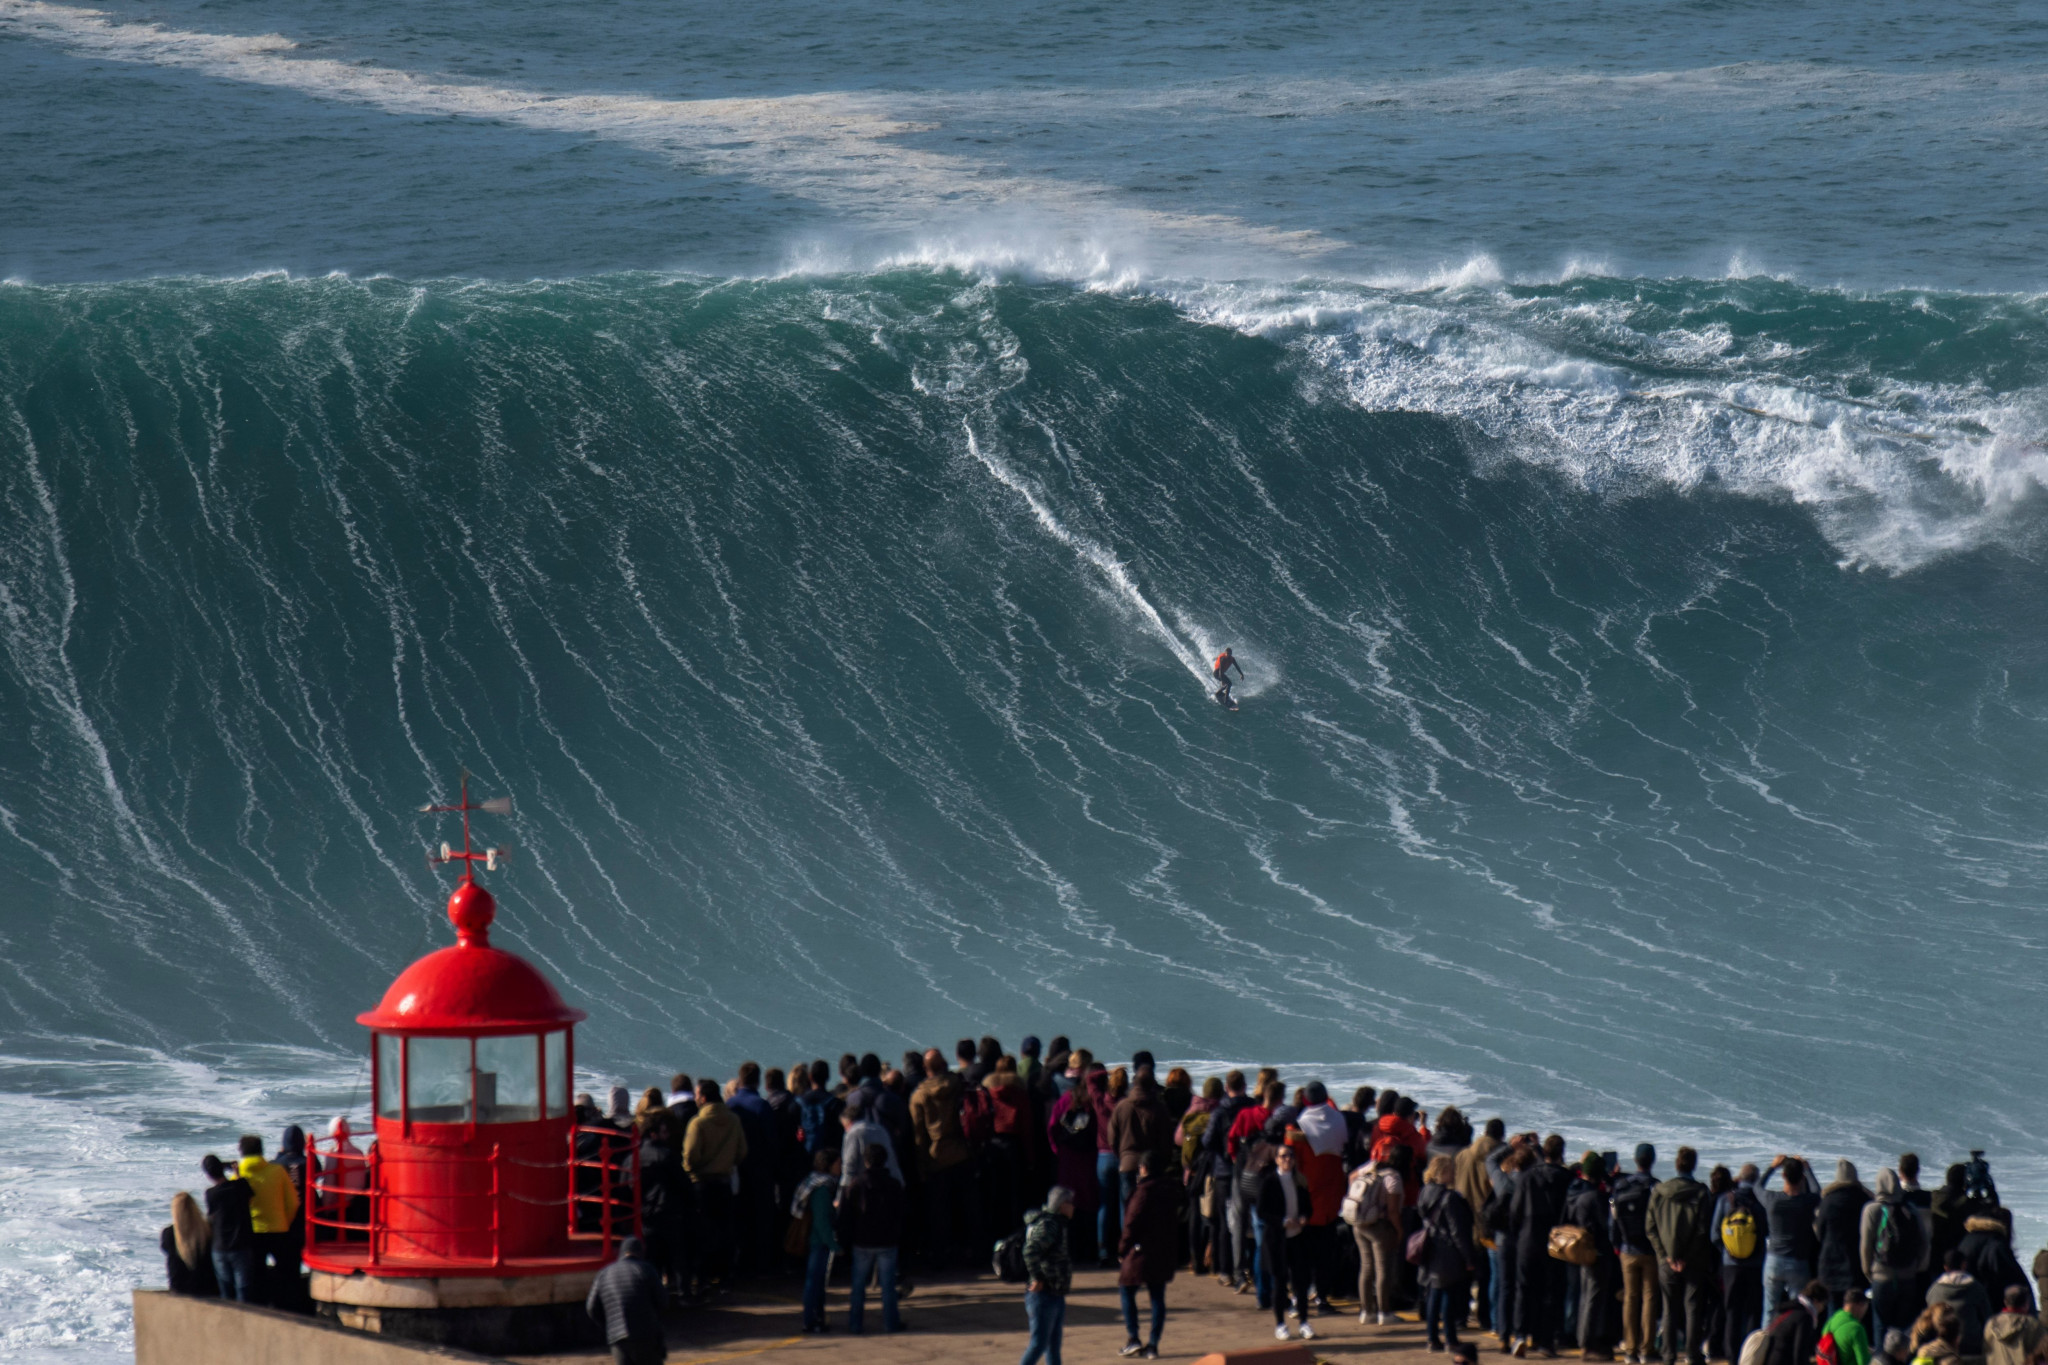 Nazaré, famed for its big waves, will host the event  ©Getty Images